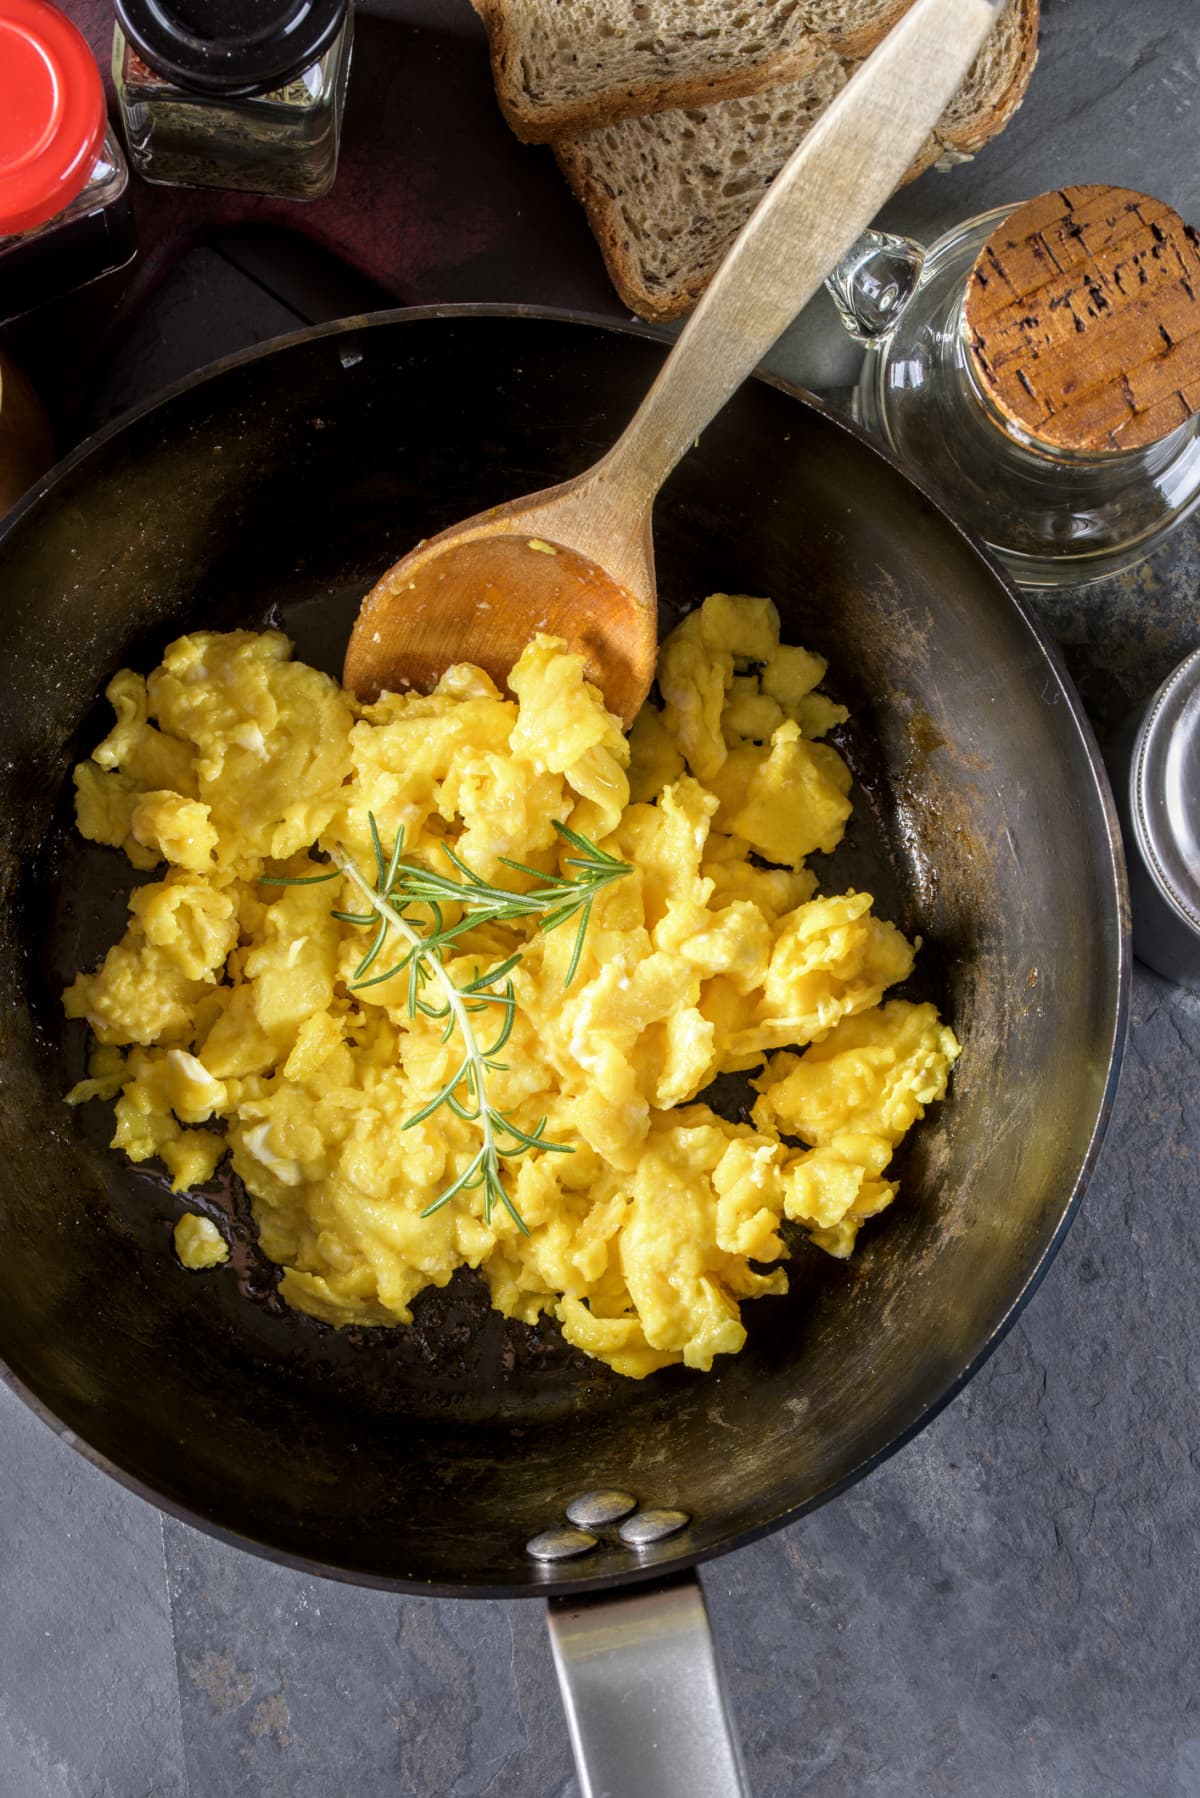 Scrambled eggs in wok with wooden spoon